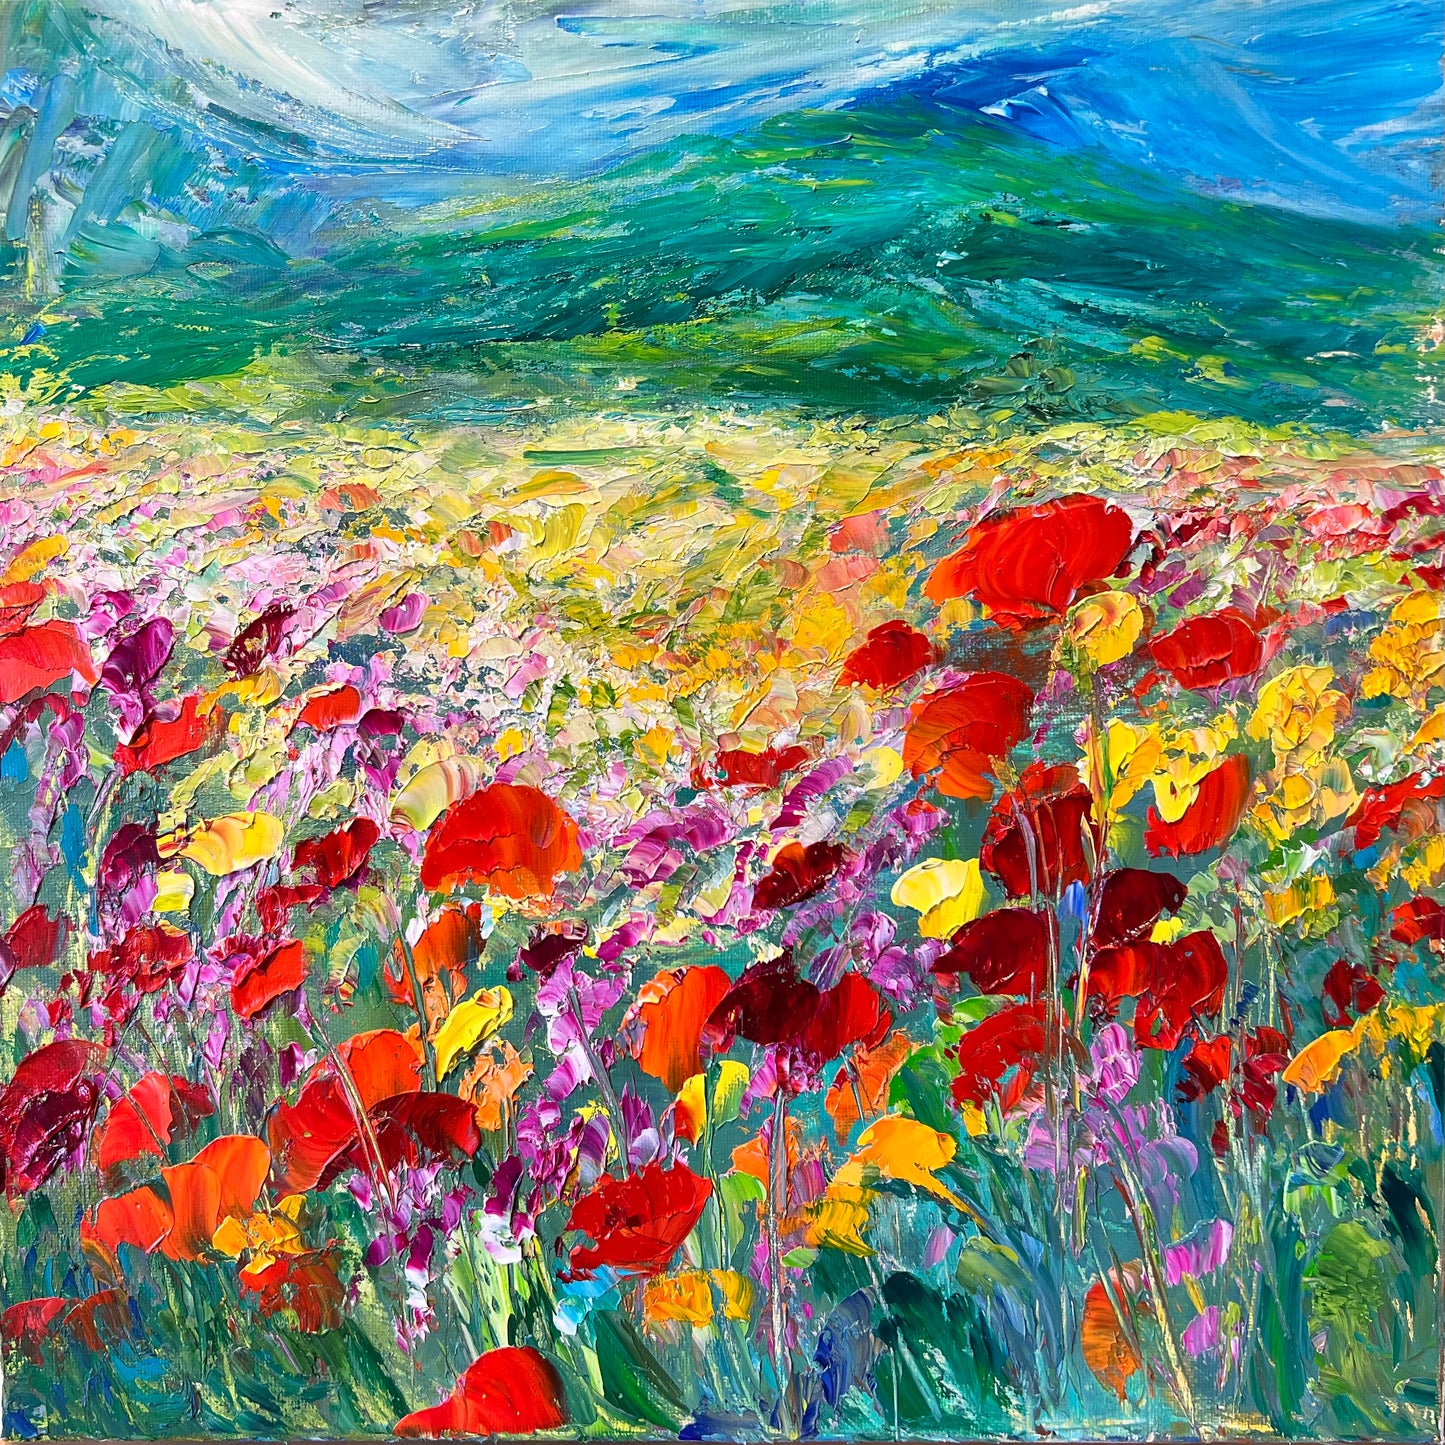 Lively Poppies II, OIL, 14" x 14"